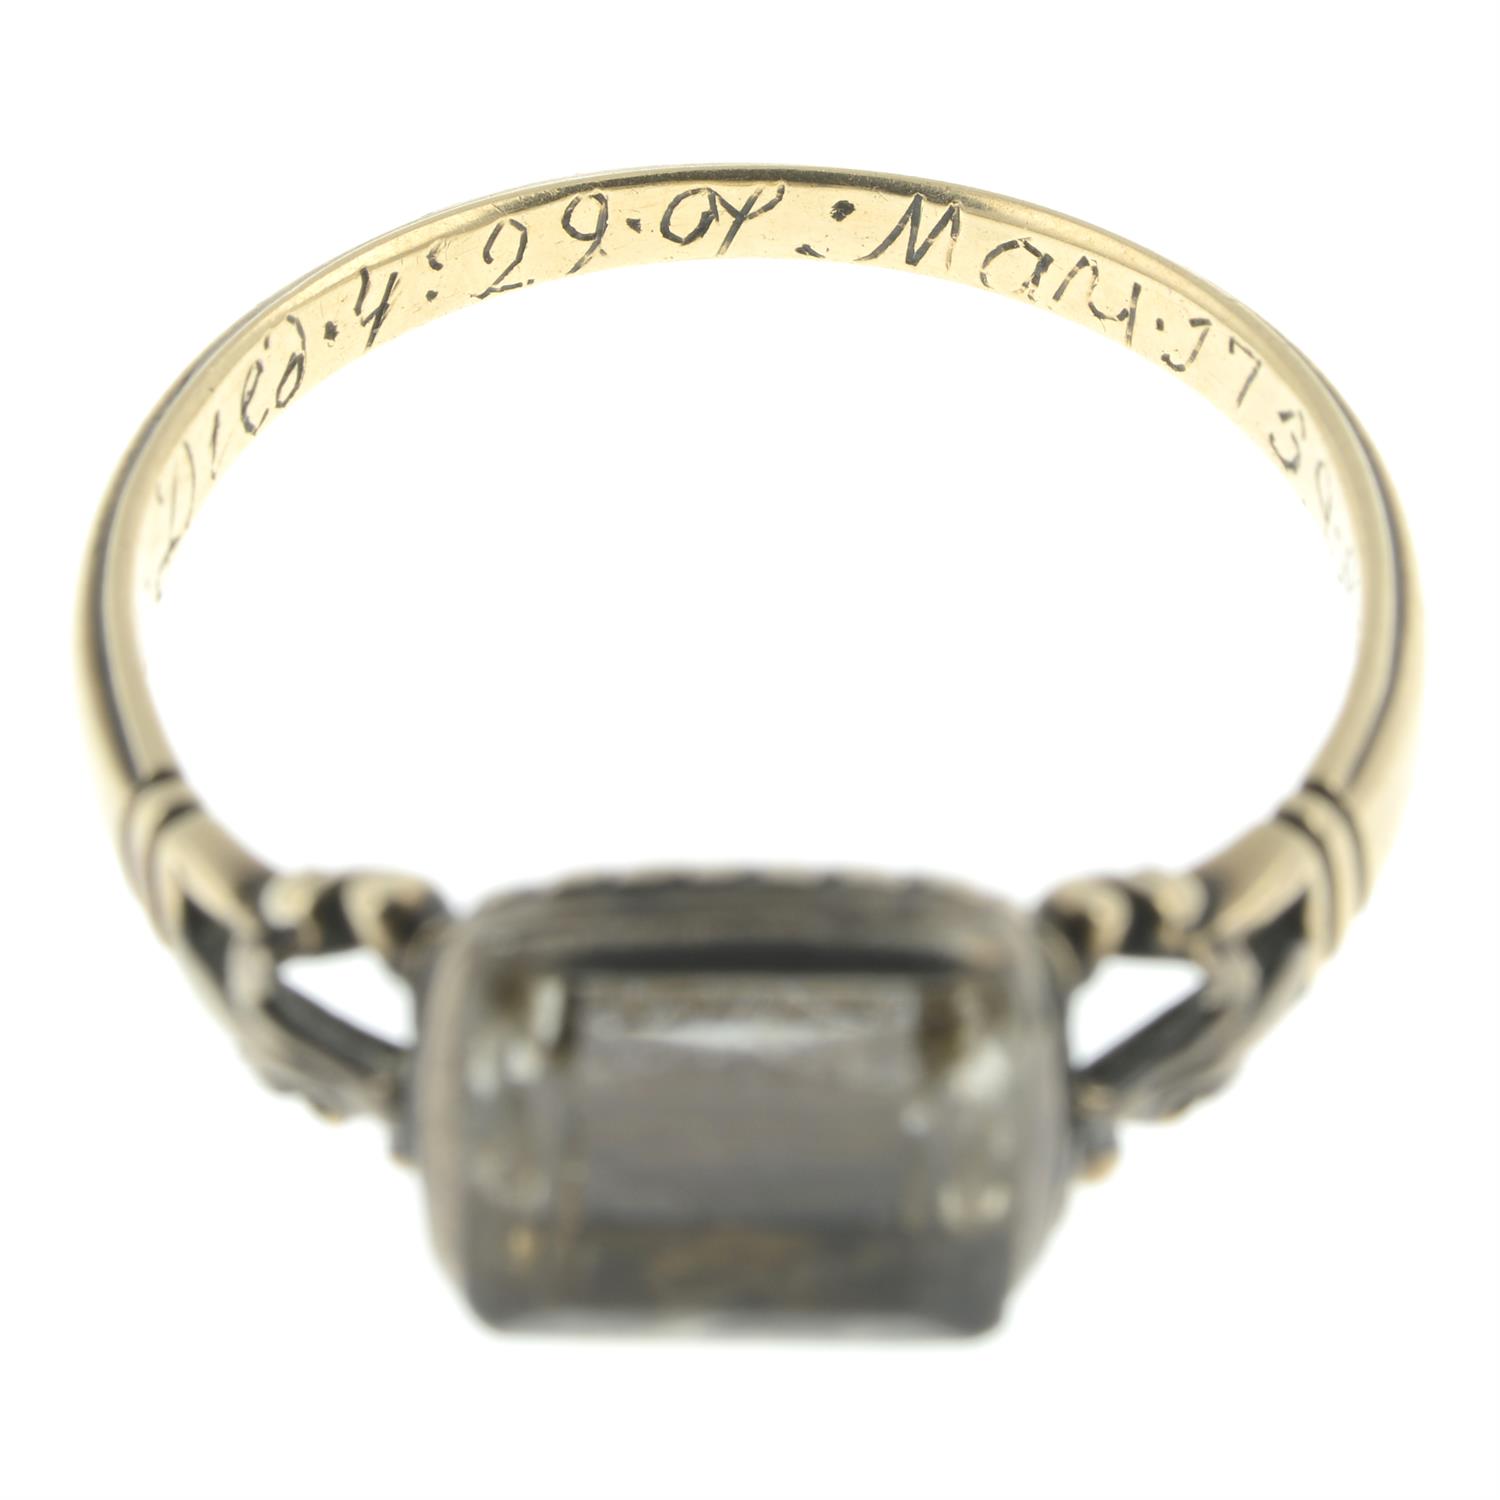 Georgian silver and gold rock crystal mourning ring - Image 5 of 7